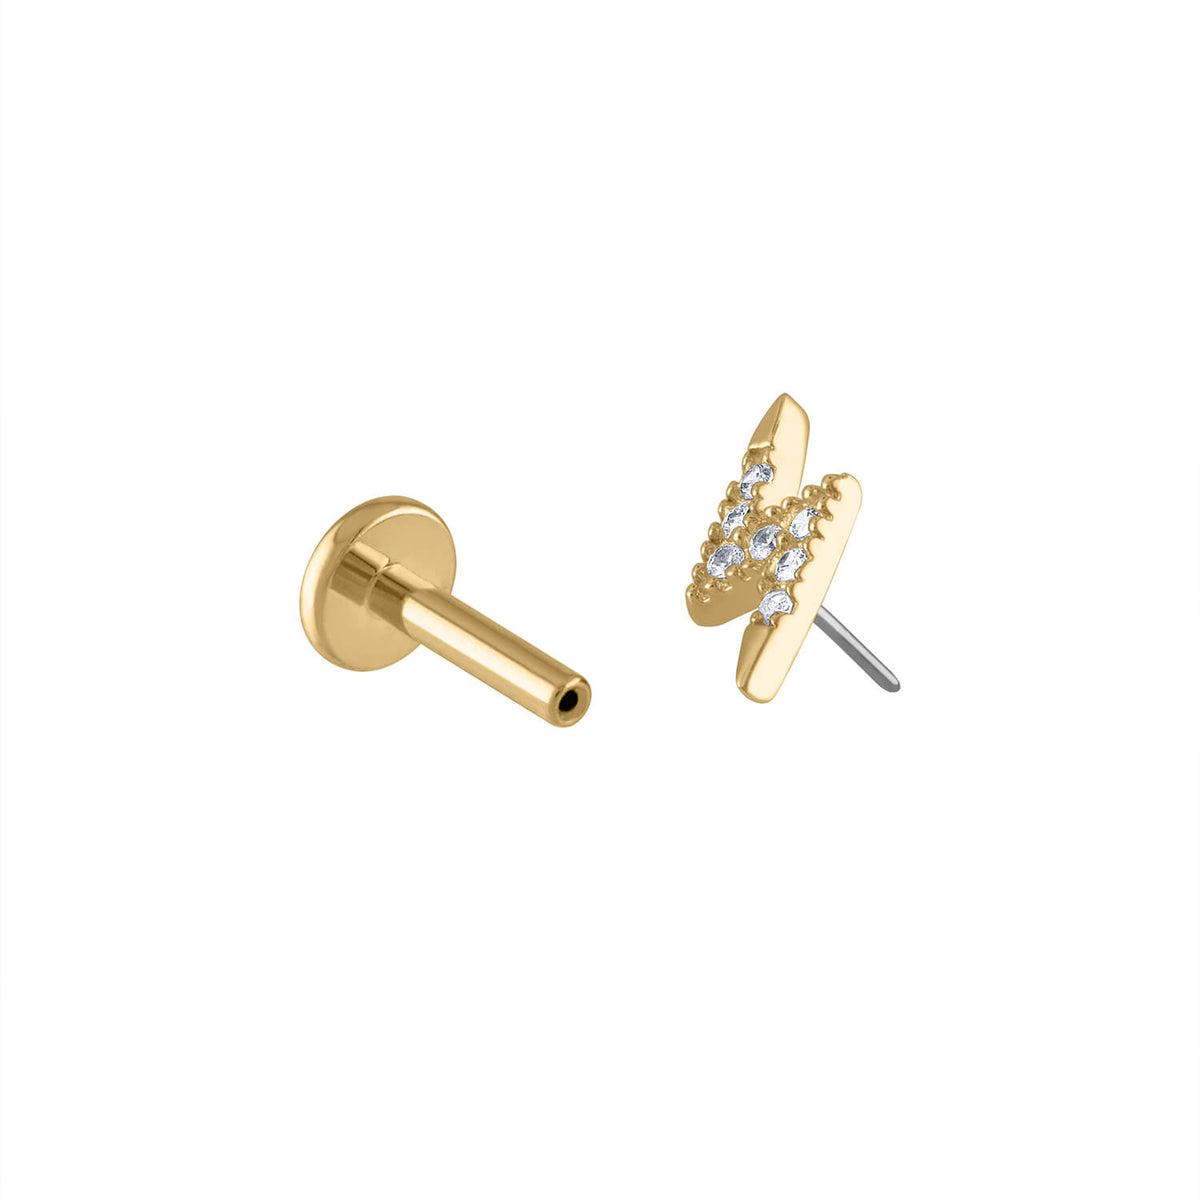 Pave Moon Threaded Flat Back Earring, Titanium - Gold / 16g: Most Cartilage Piercings / 8mm at Maison Miru